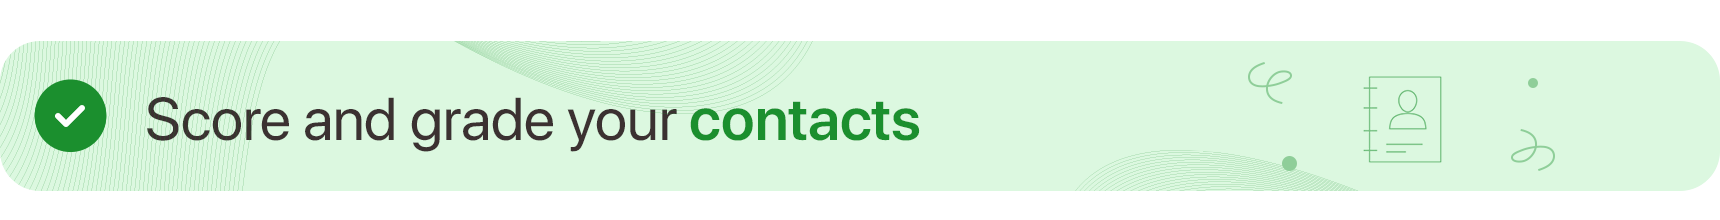 Score and grade your contacts